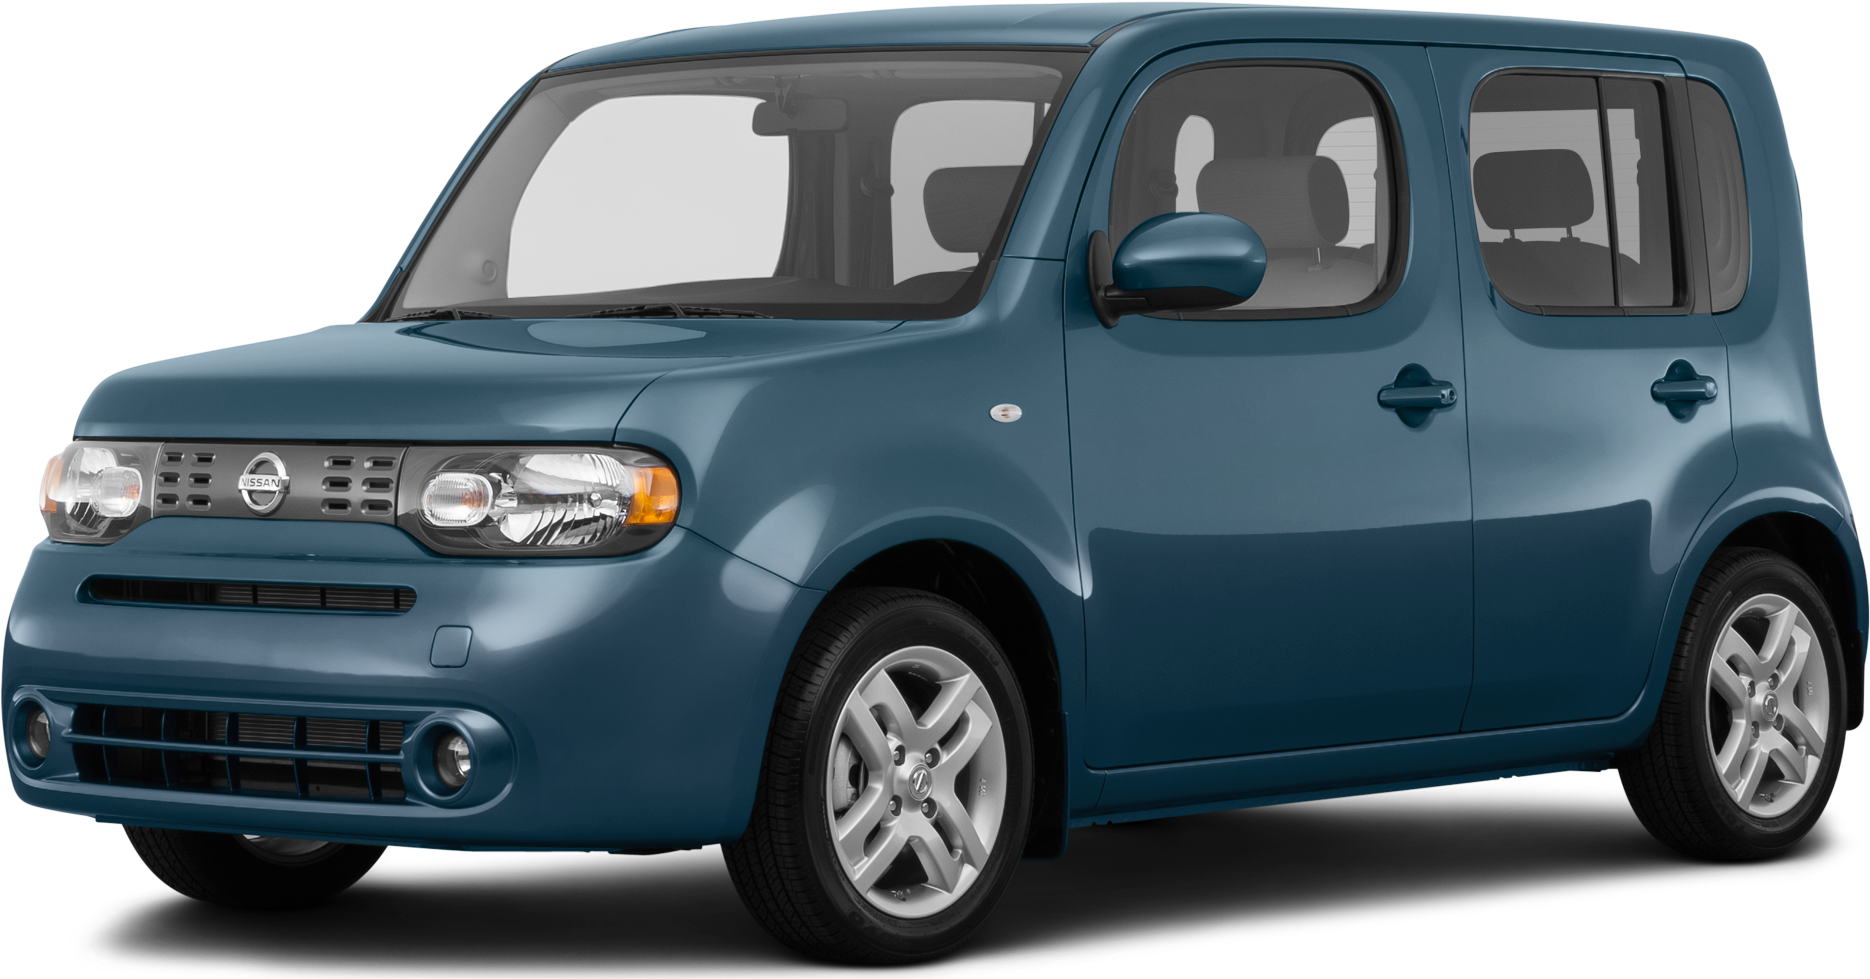 2014 Nissan cube Price, Value, Ratings  Reviews Kelley Blue Book